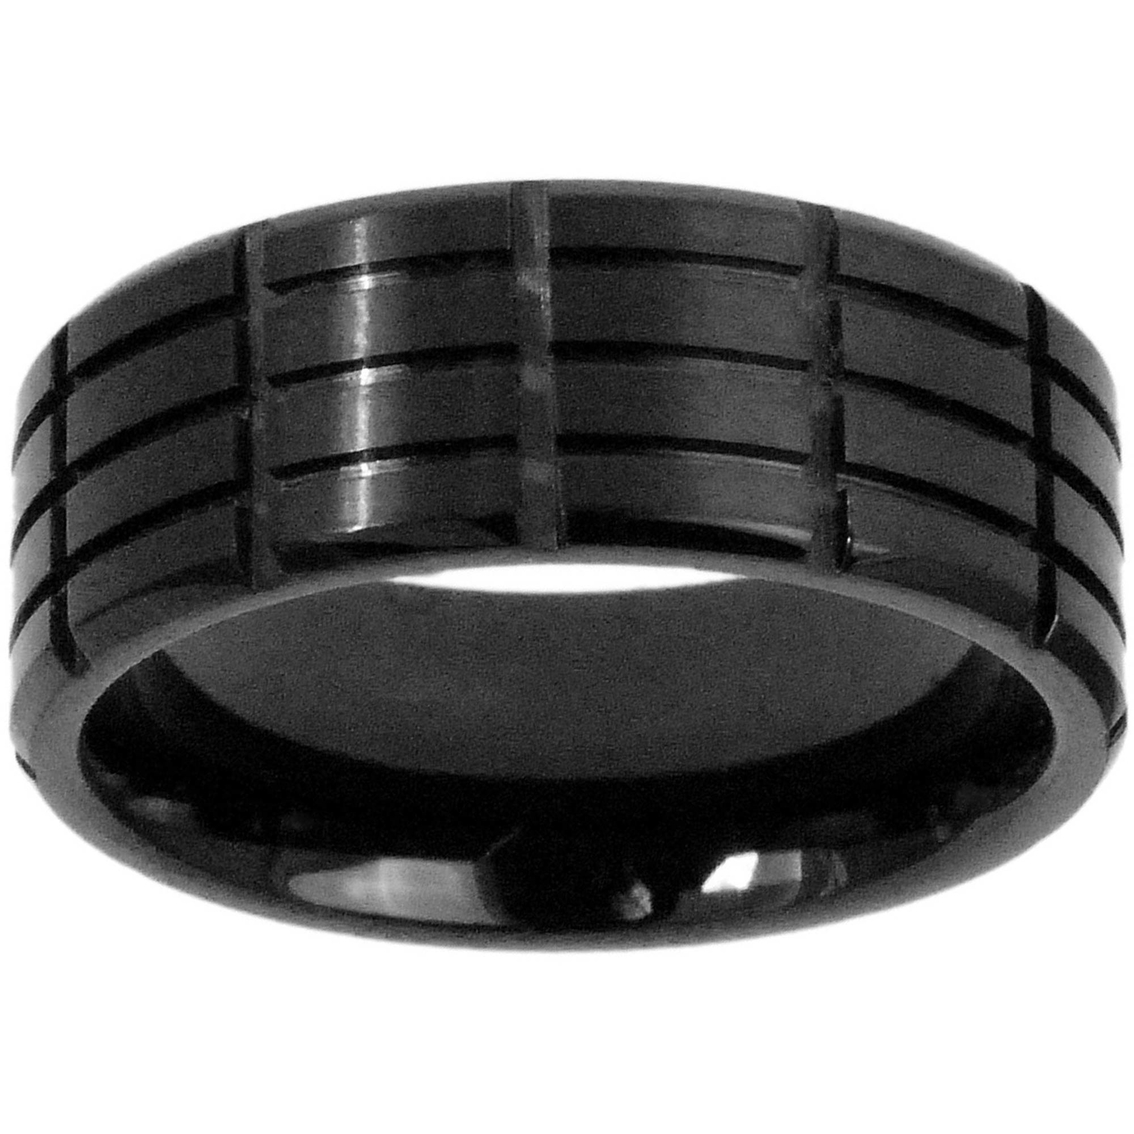 Black Ion Plated Stainless Steel 8mm Band | Wedding Bands | Jewelry What Is Ion Plated Stainless Steel